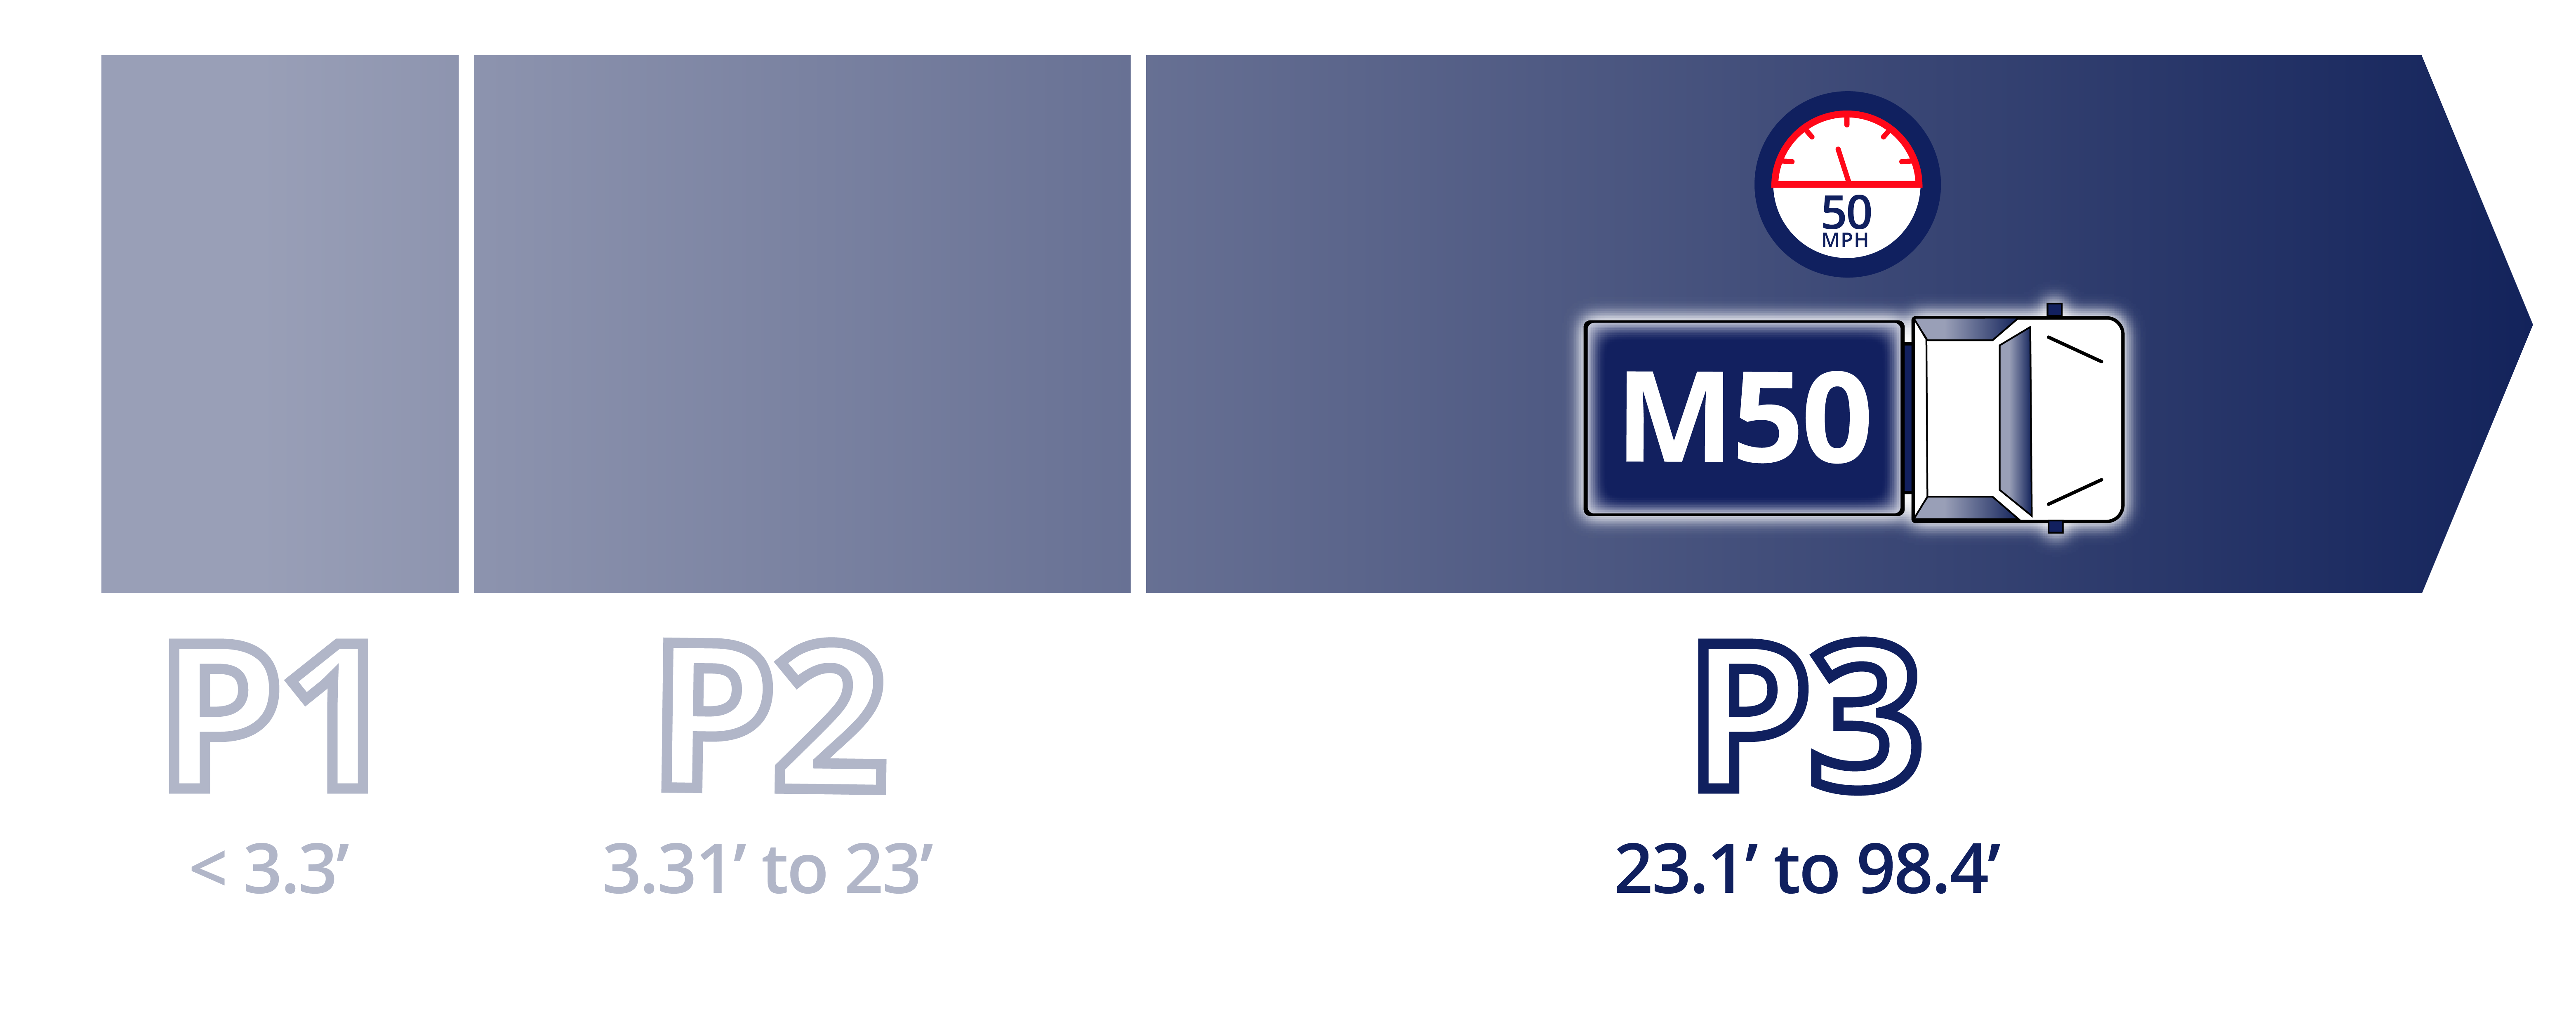 This crash rating is M50/P3